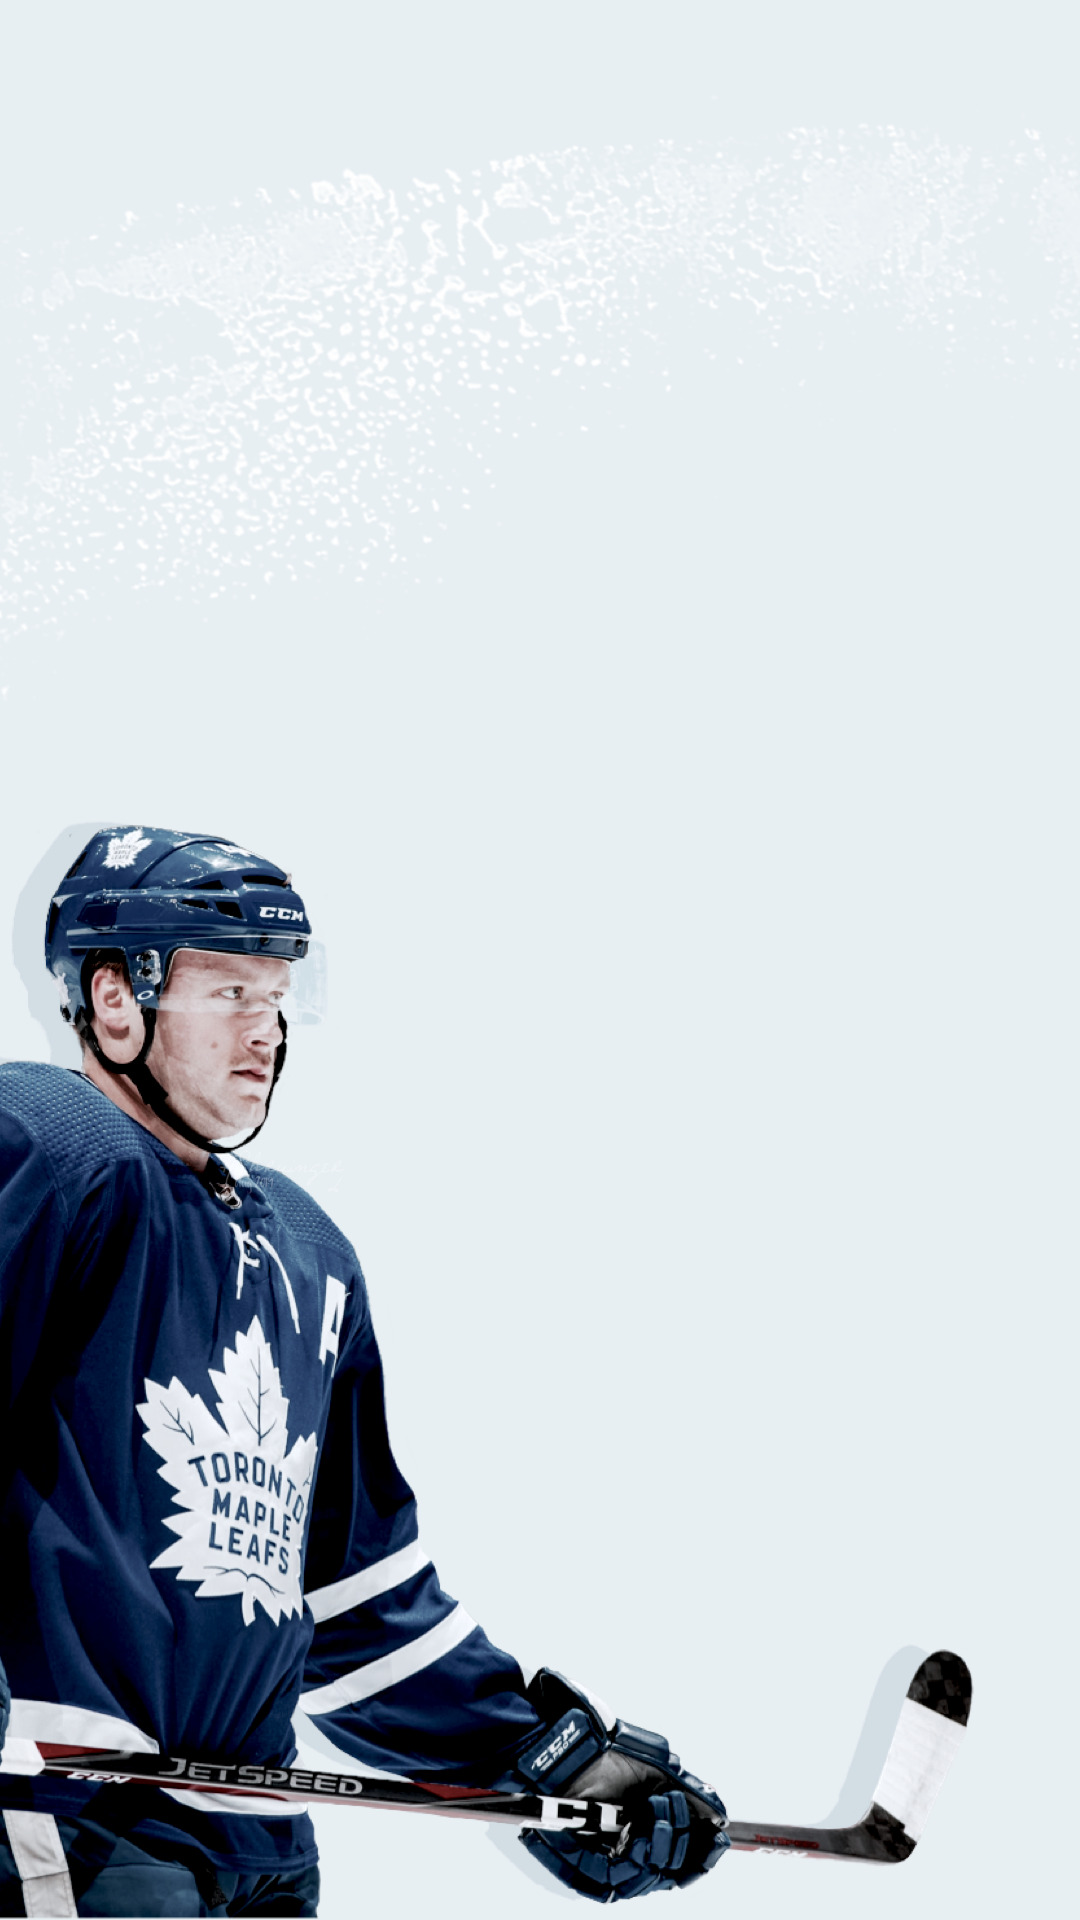 Hockey Wallpapers - Morgan Rielly wallpaper! 4k Share it and go